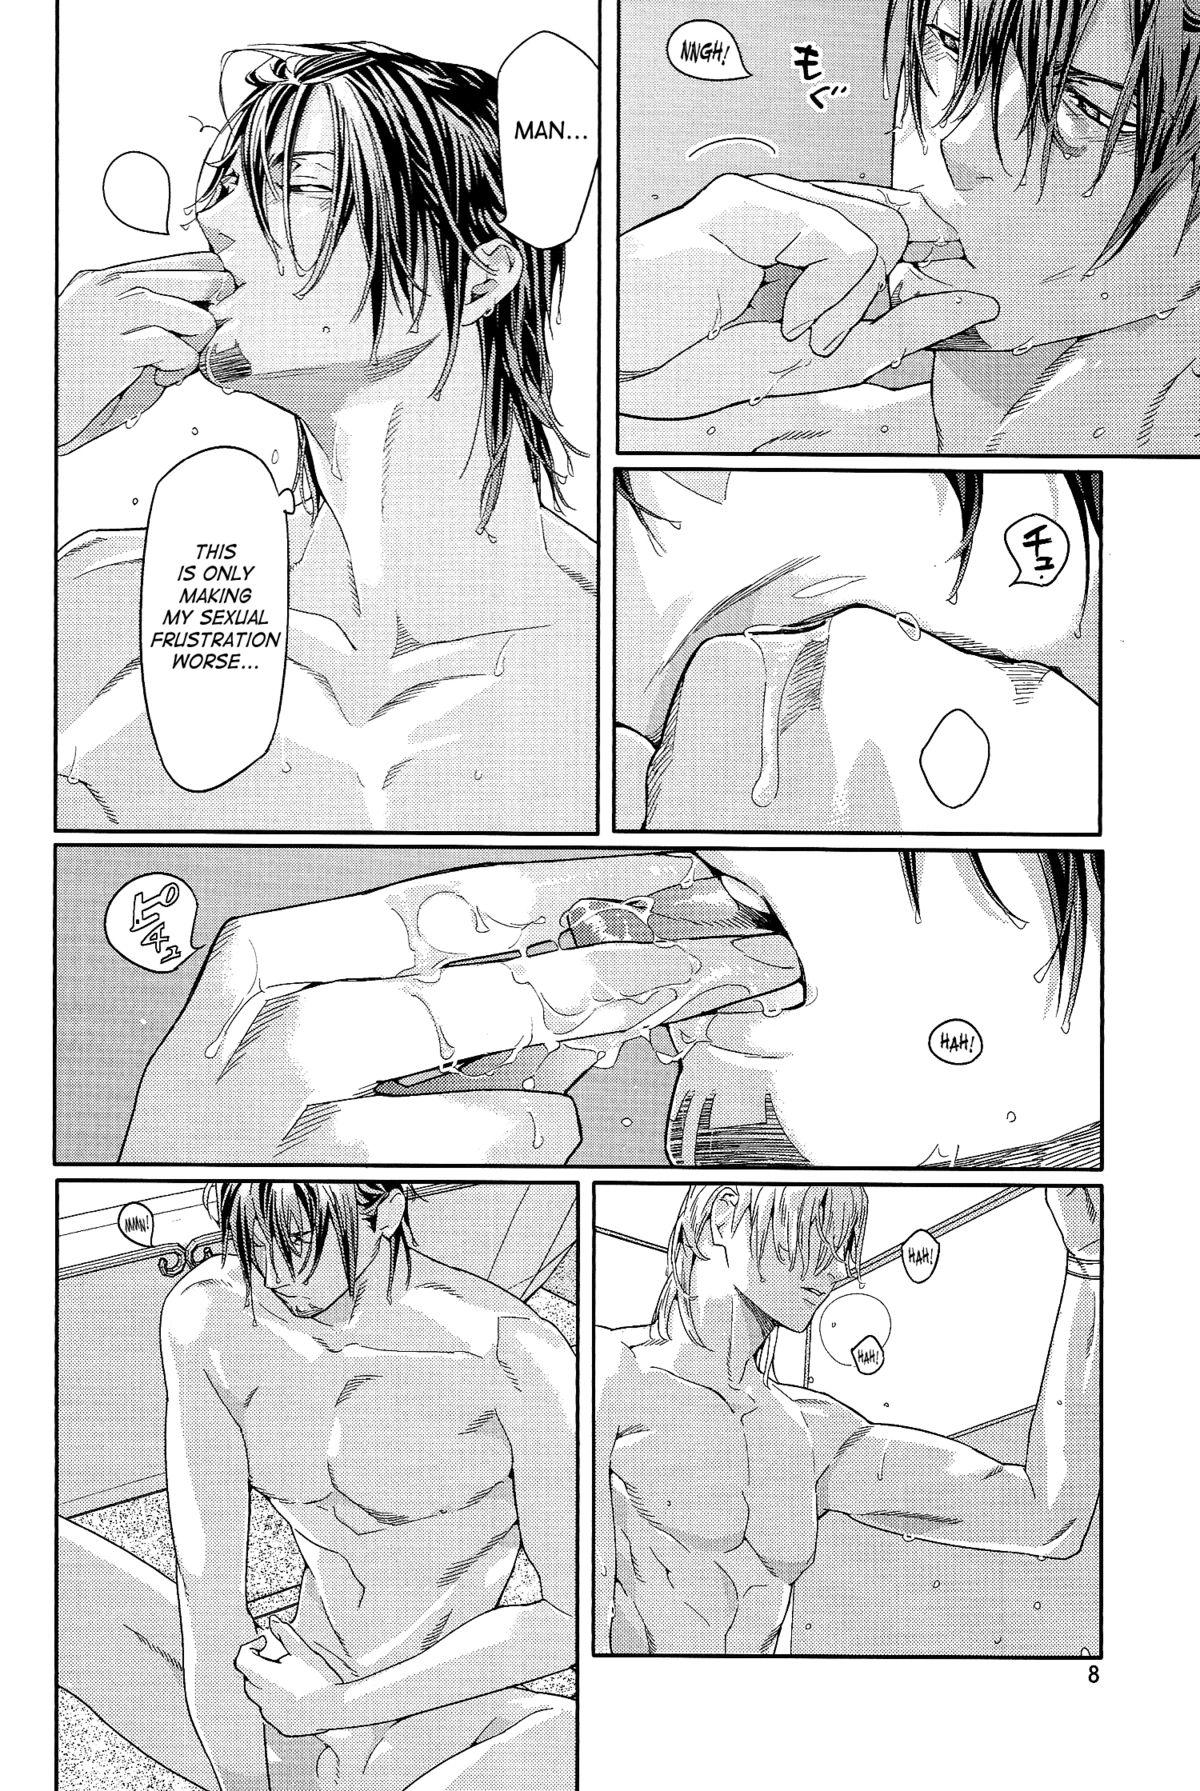 Titty Fuck CANDY MAN Vol. 3 - Tiger and bunny Punish - Page 6